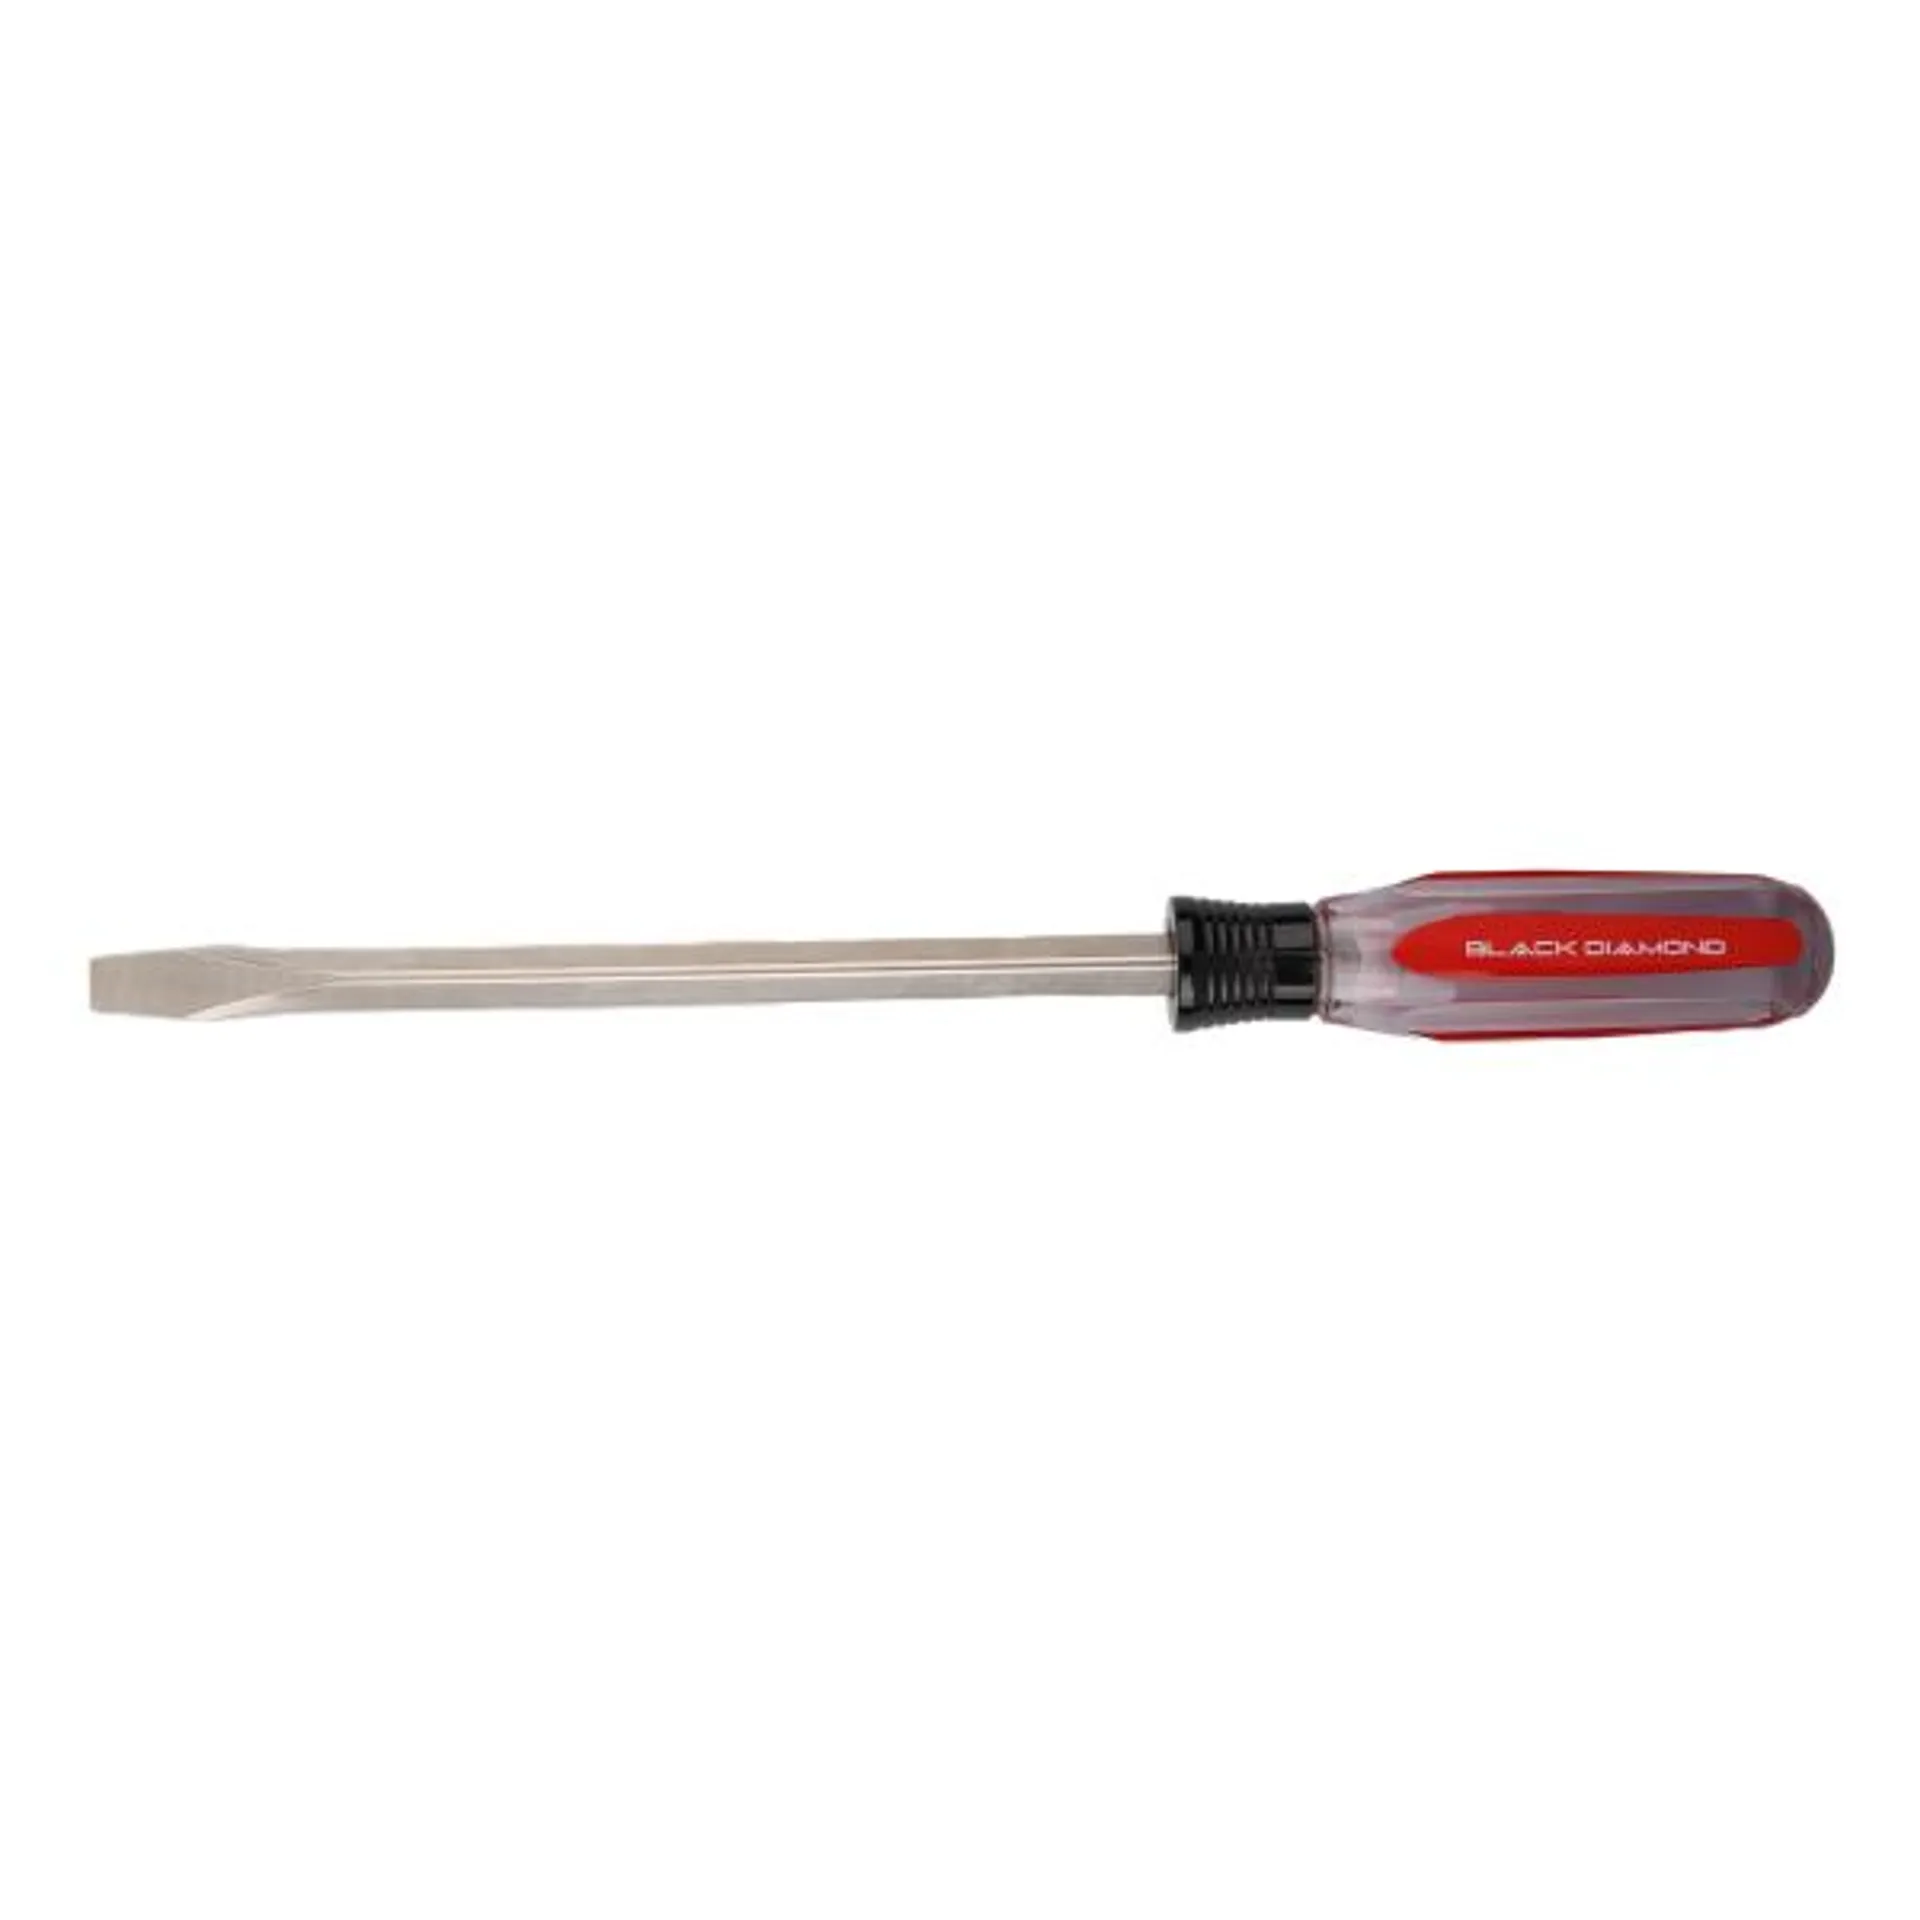 3/8" X 8" Slotted Screwdriver